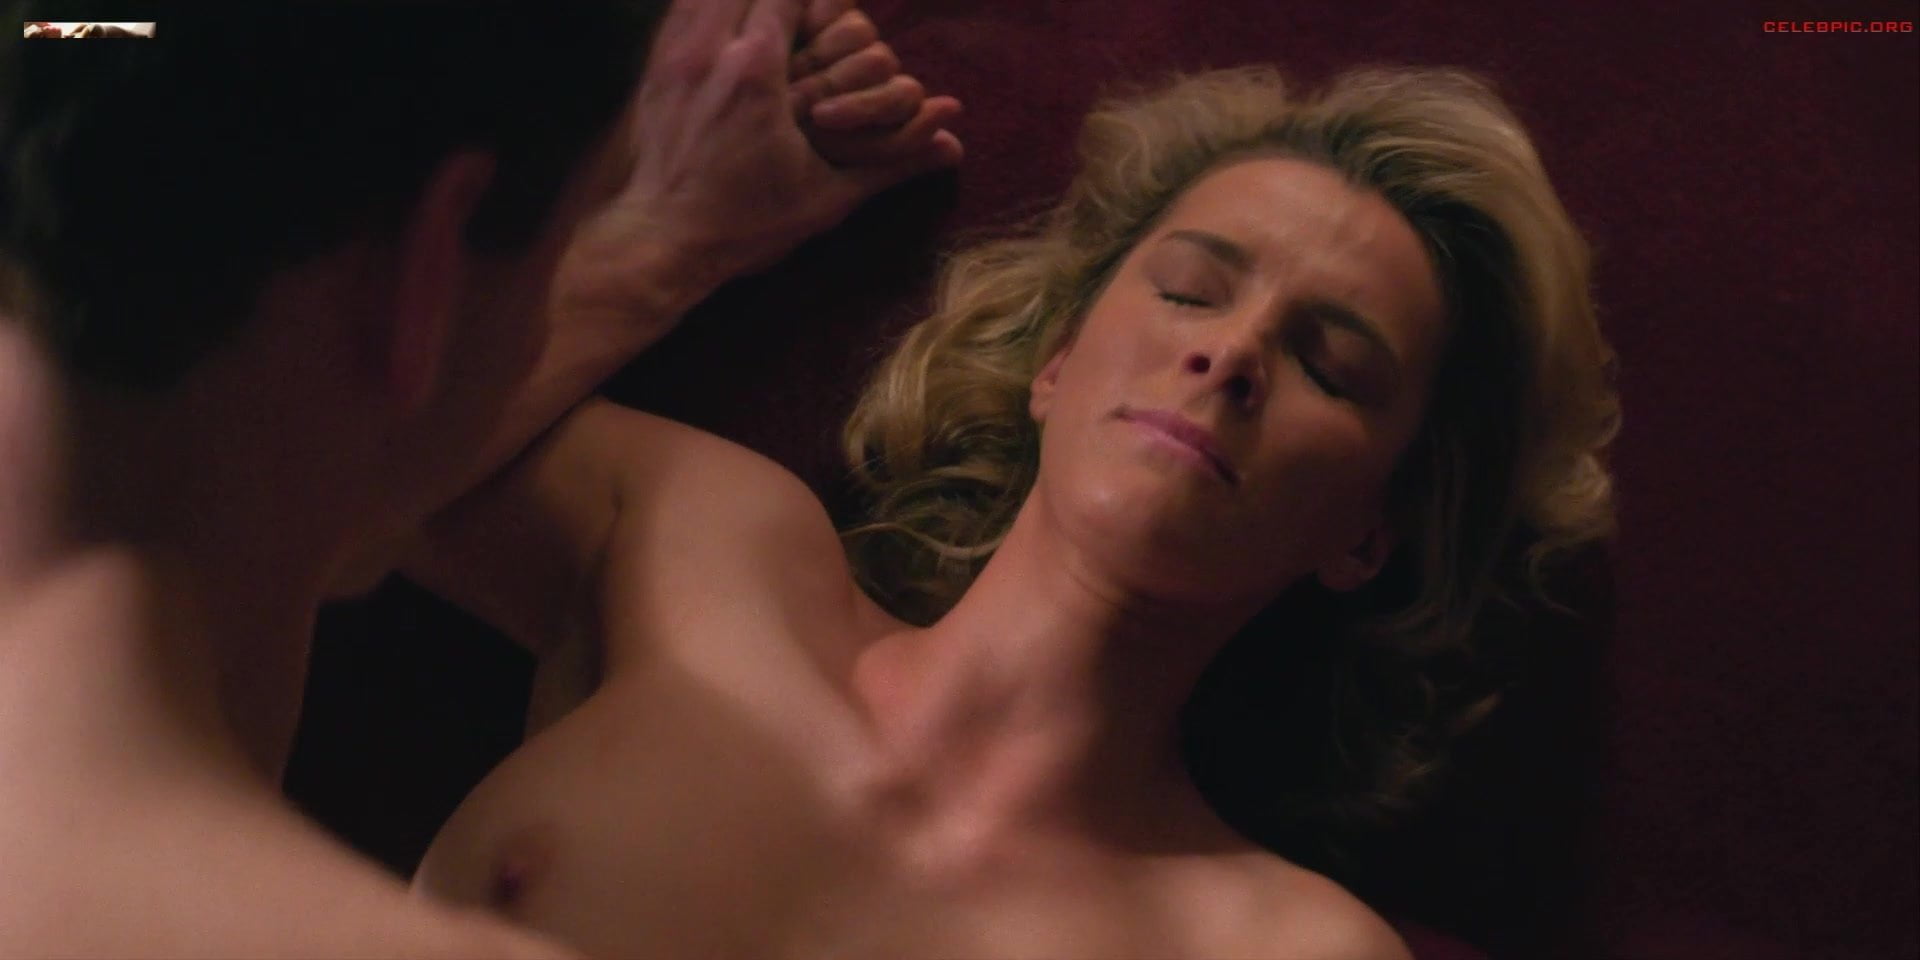 Watch Betty Gilpin - glow S03 E04 video on xHamster, the largest HD sex tub...